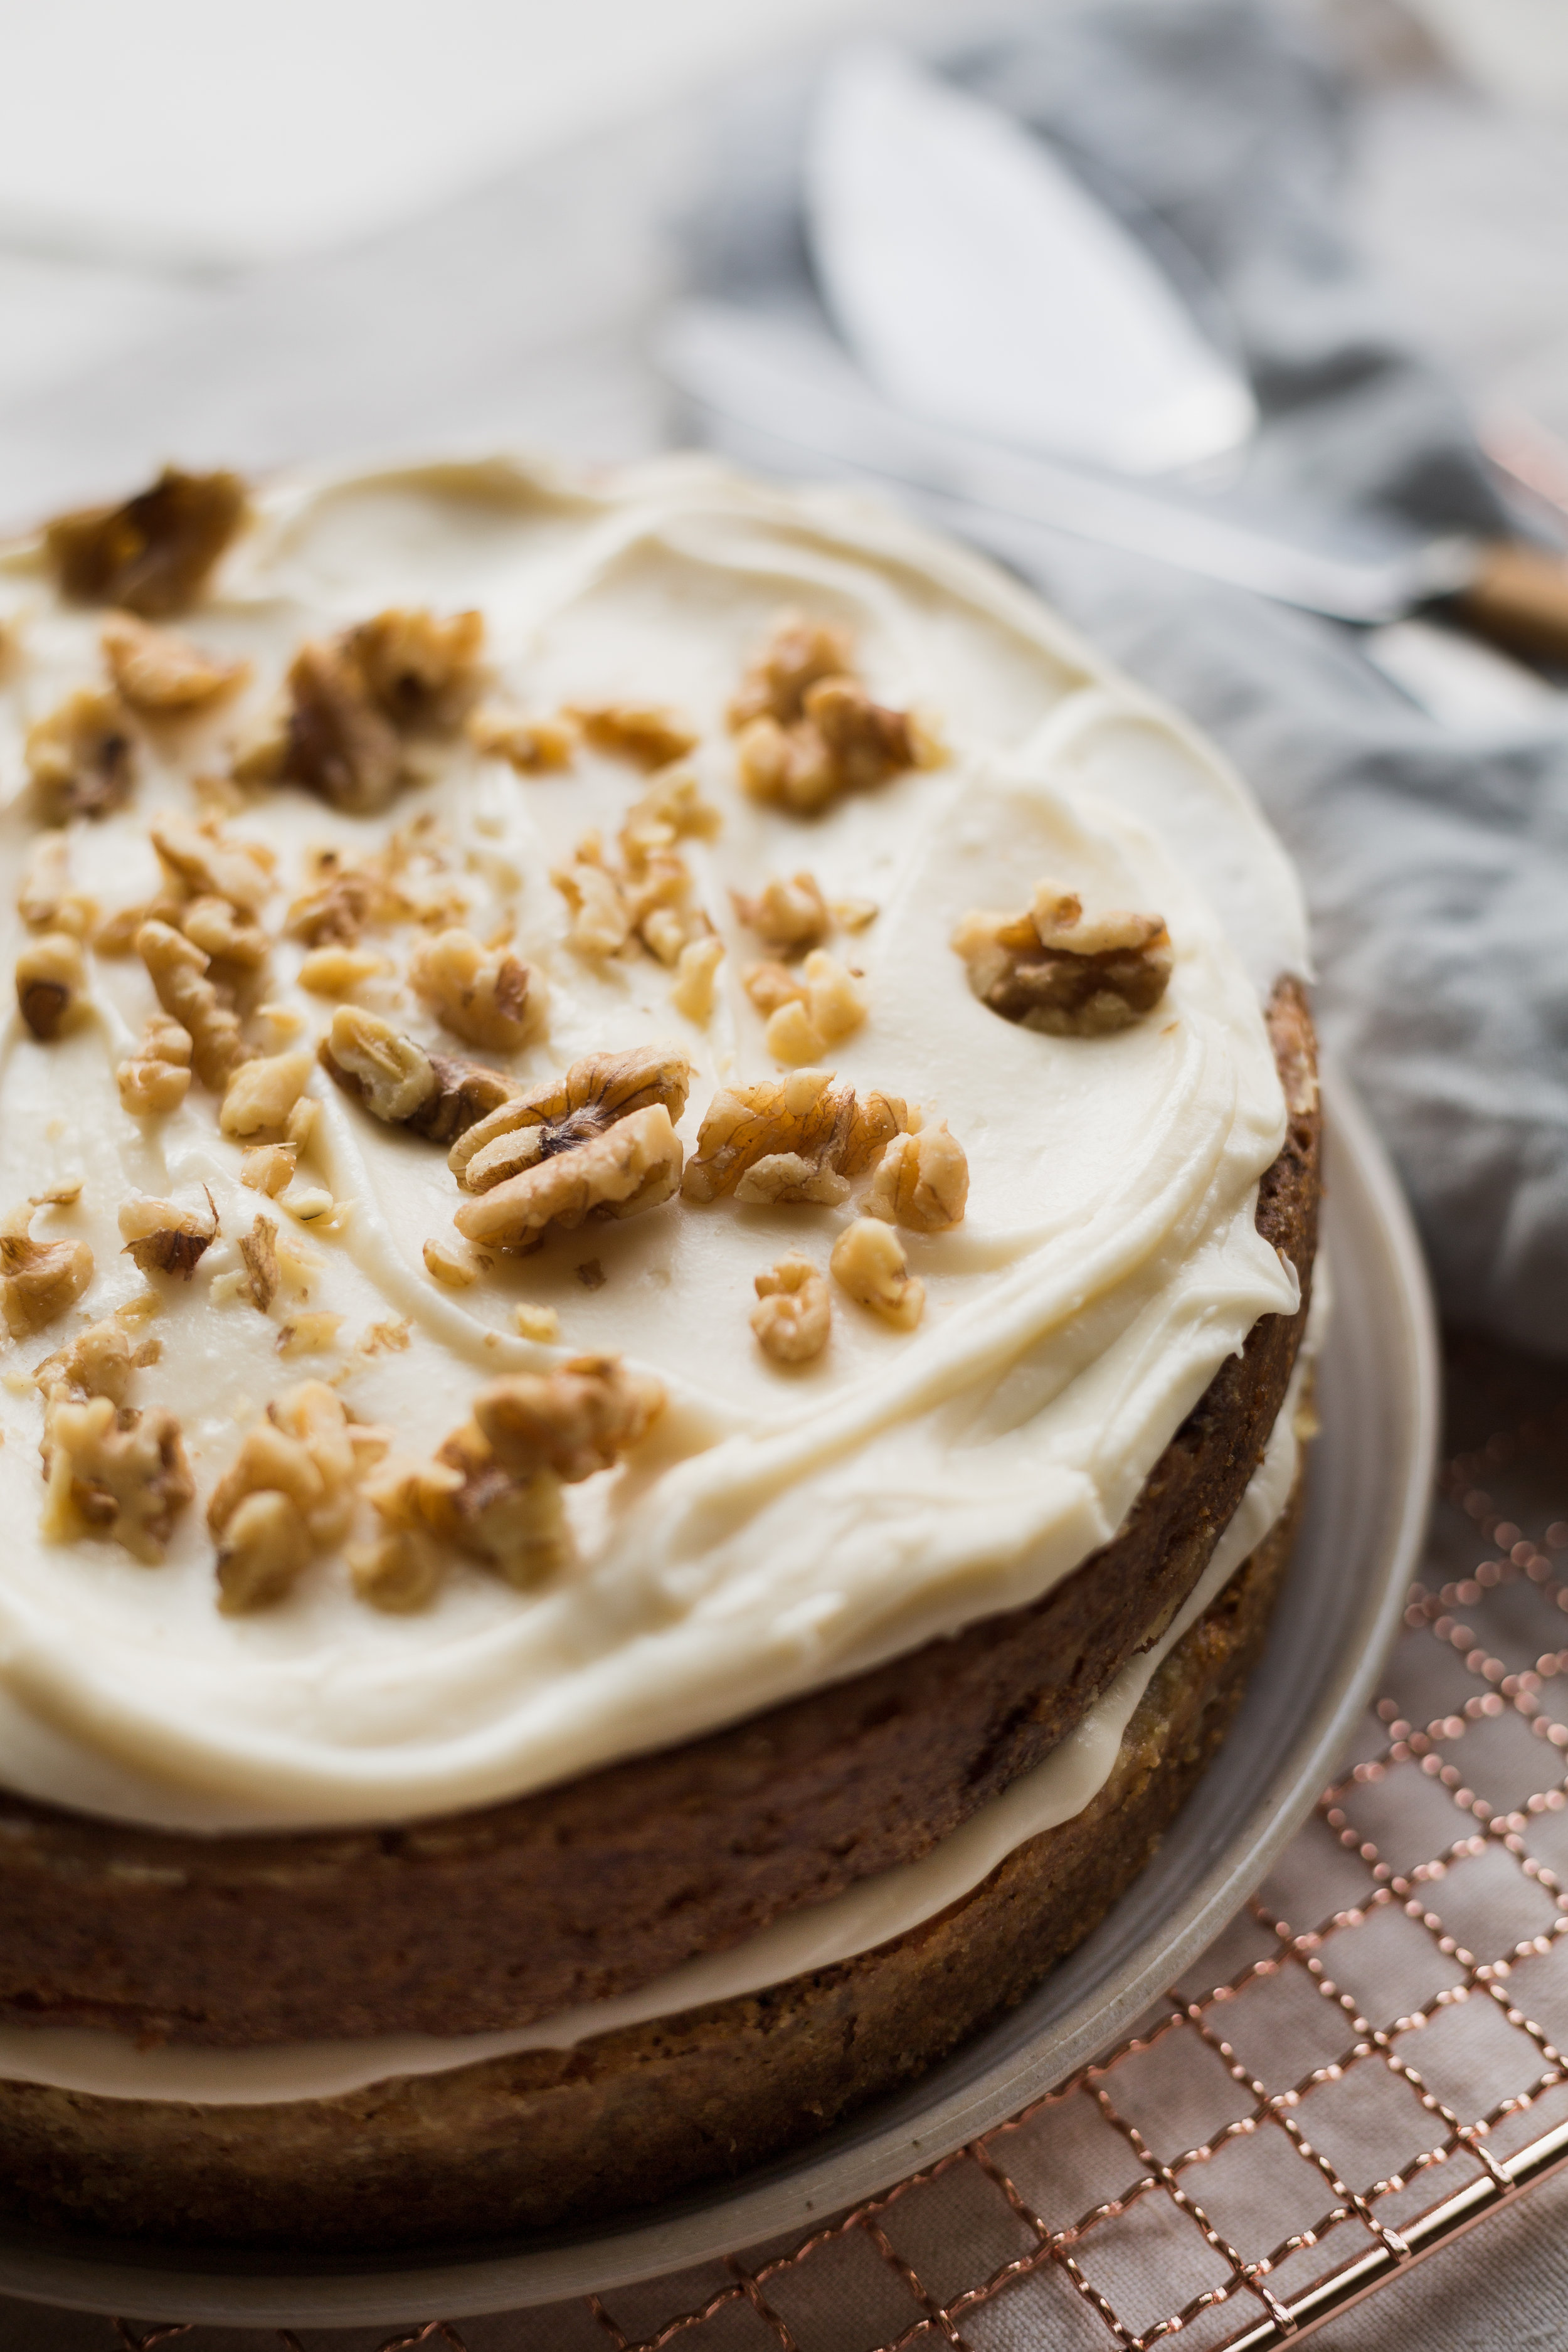 The Most delicious carrot cake you'll ever taste!